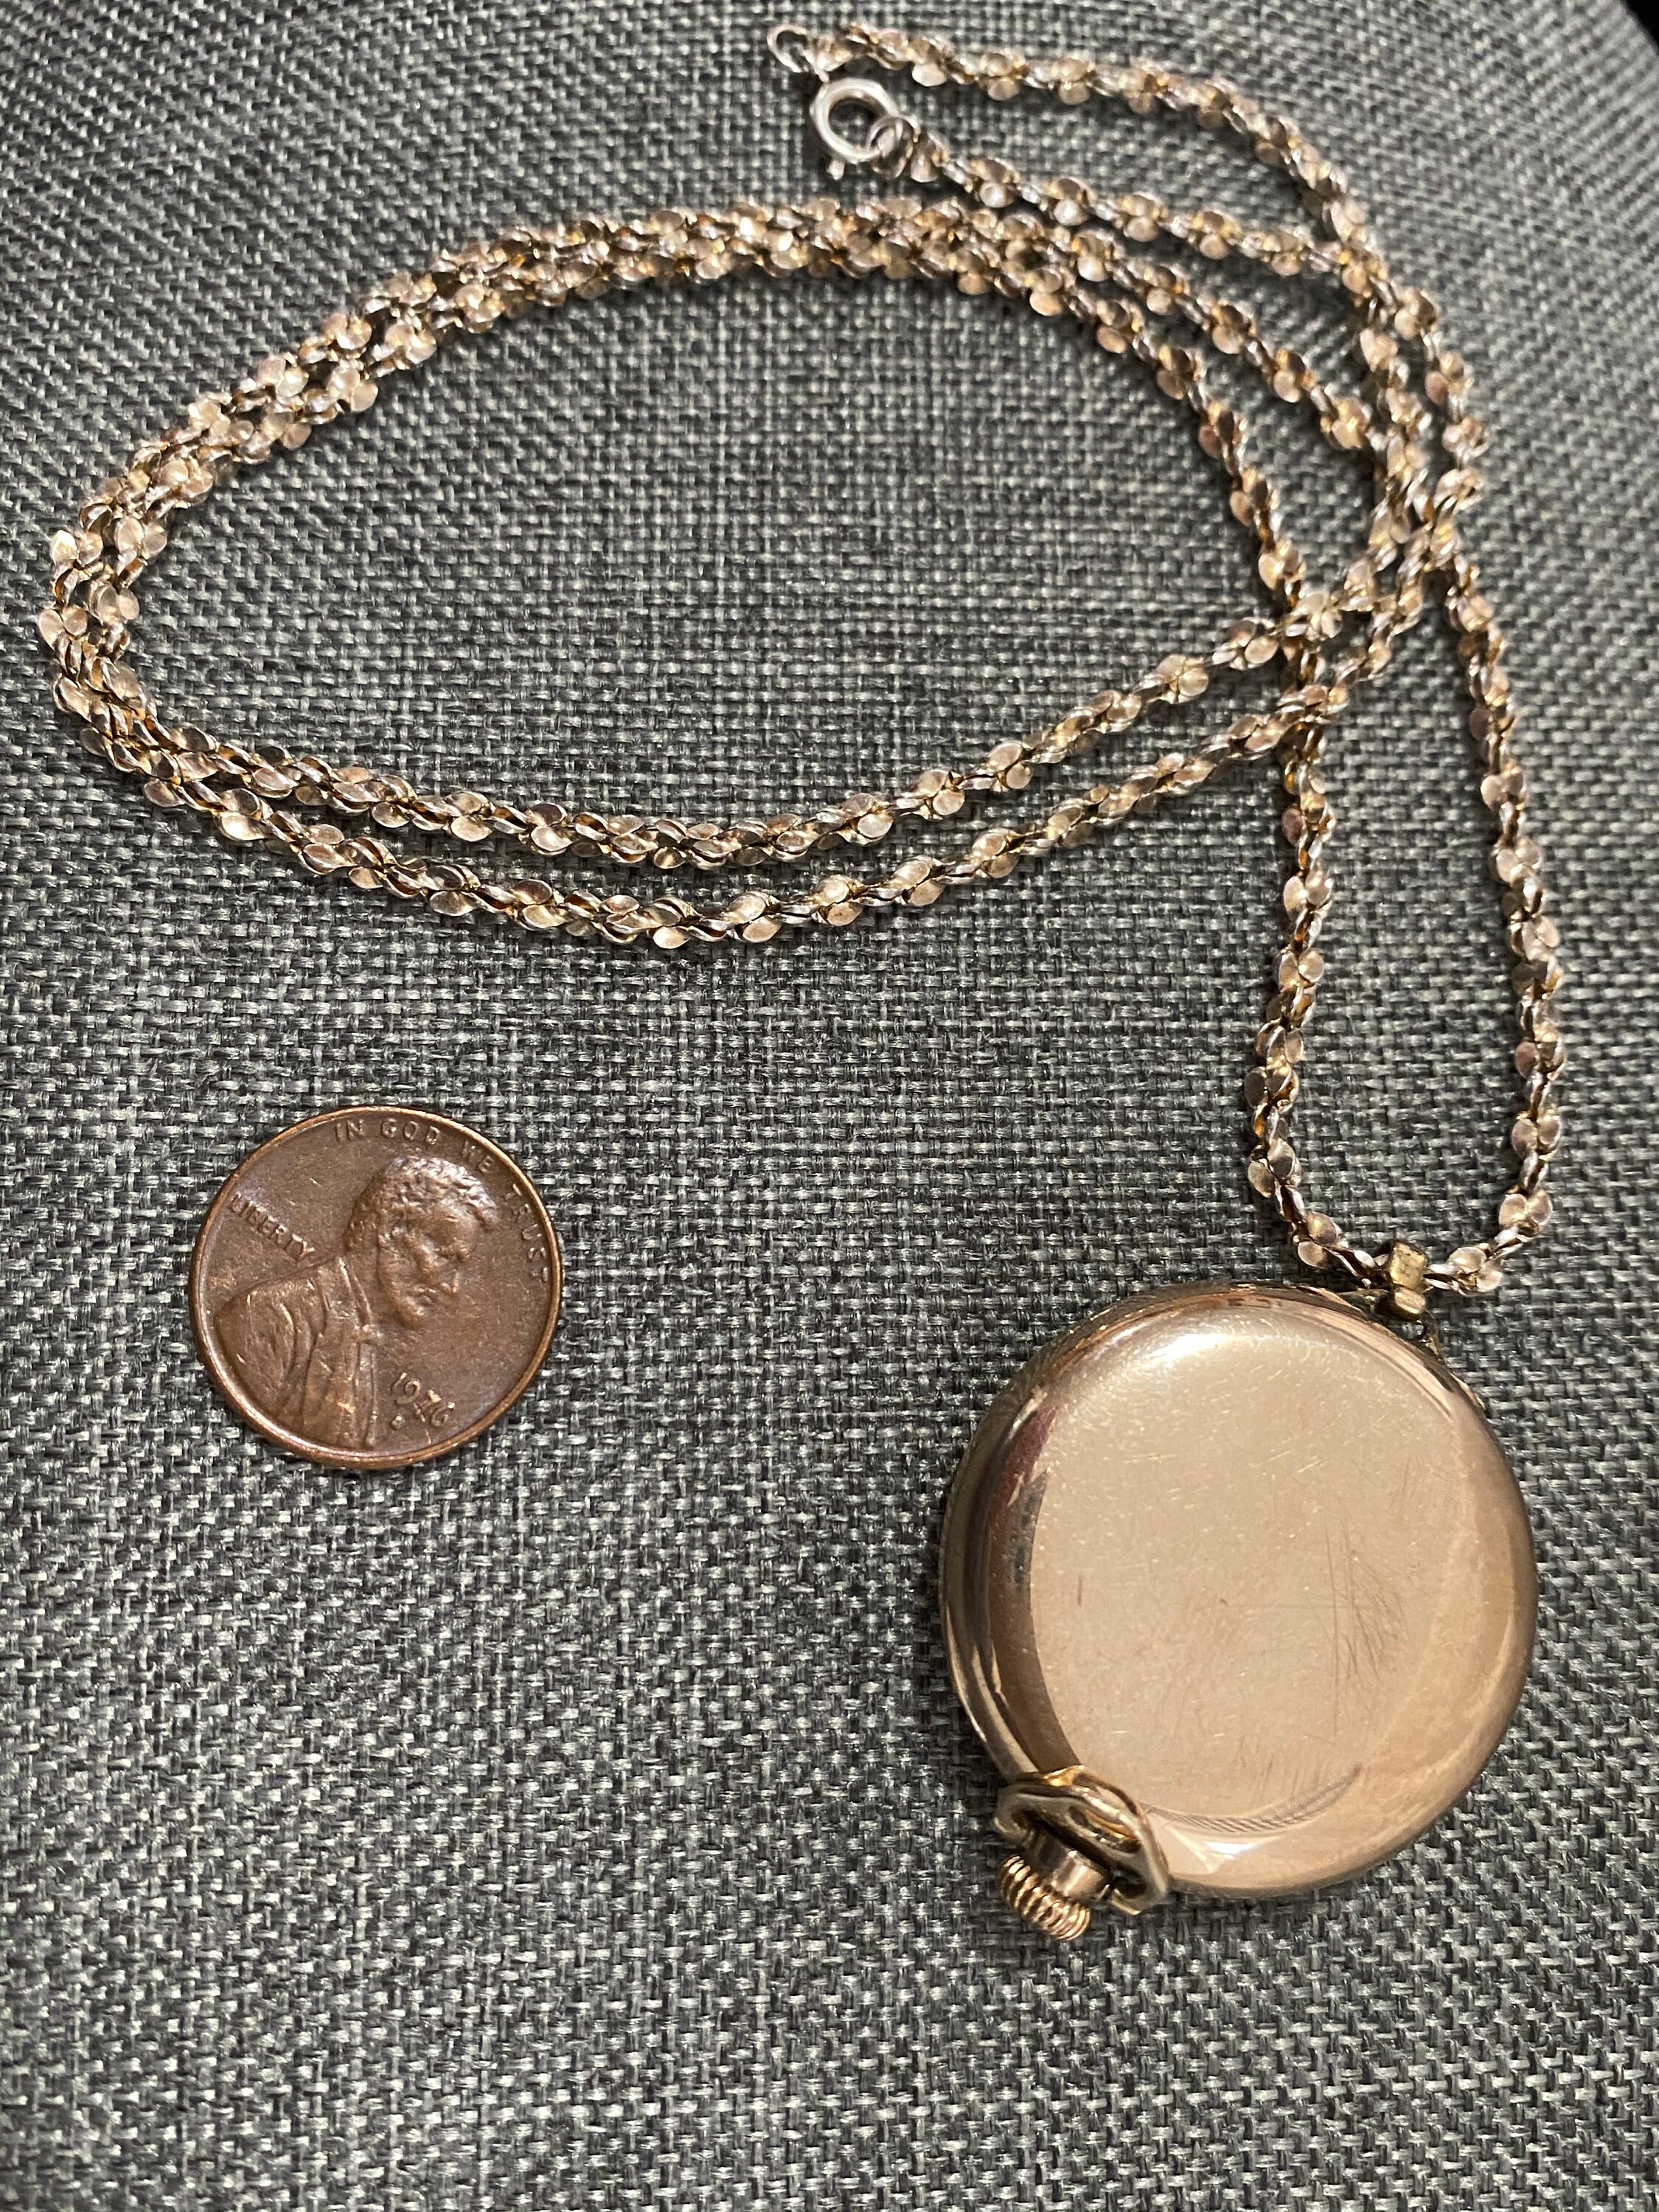 Vintage Elgin Gold Filled Watch Pendant and Sterling Chain